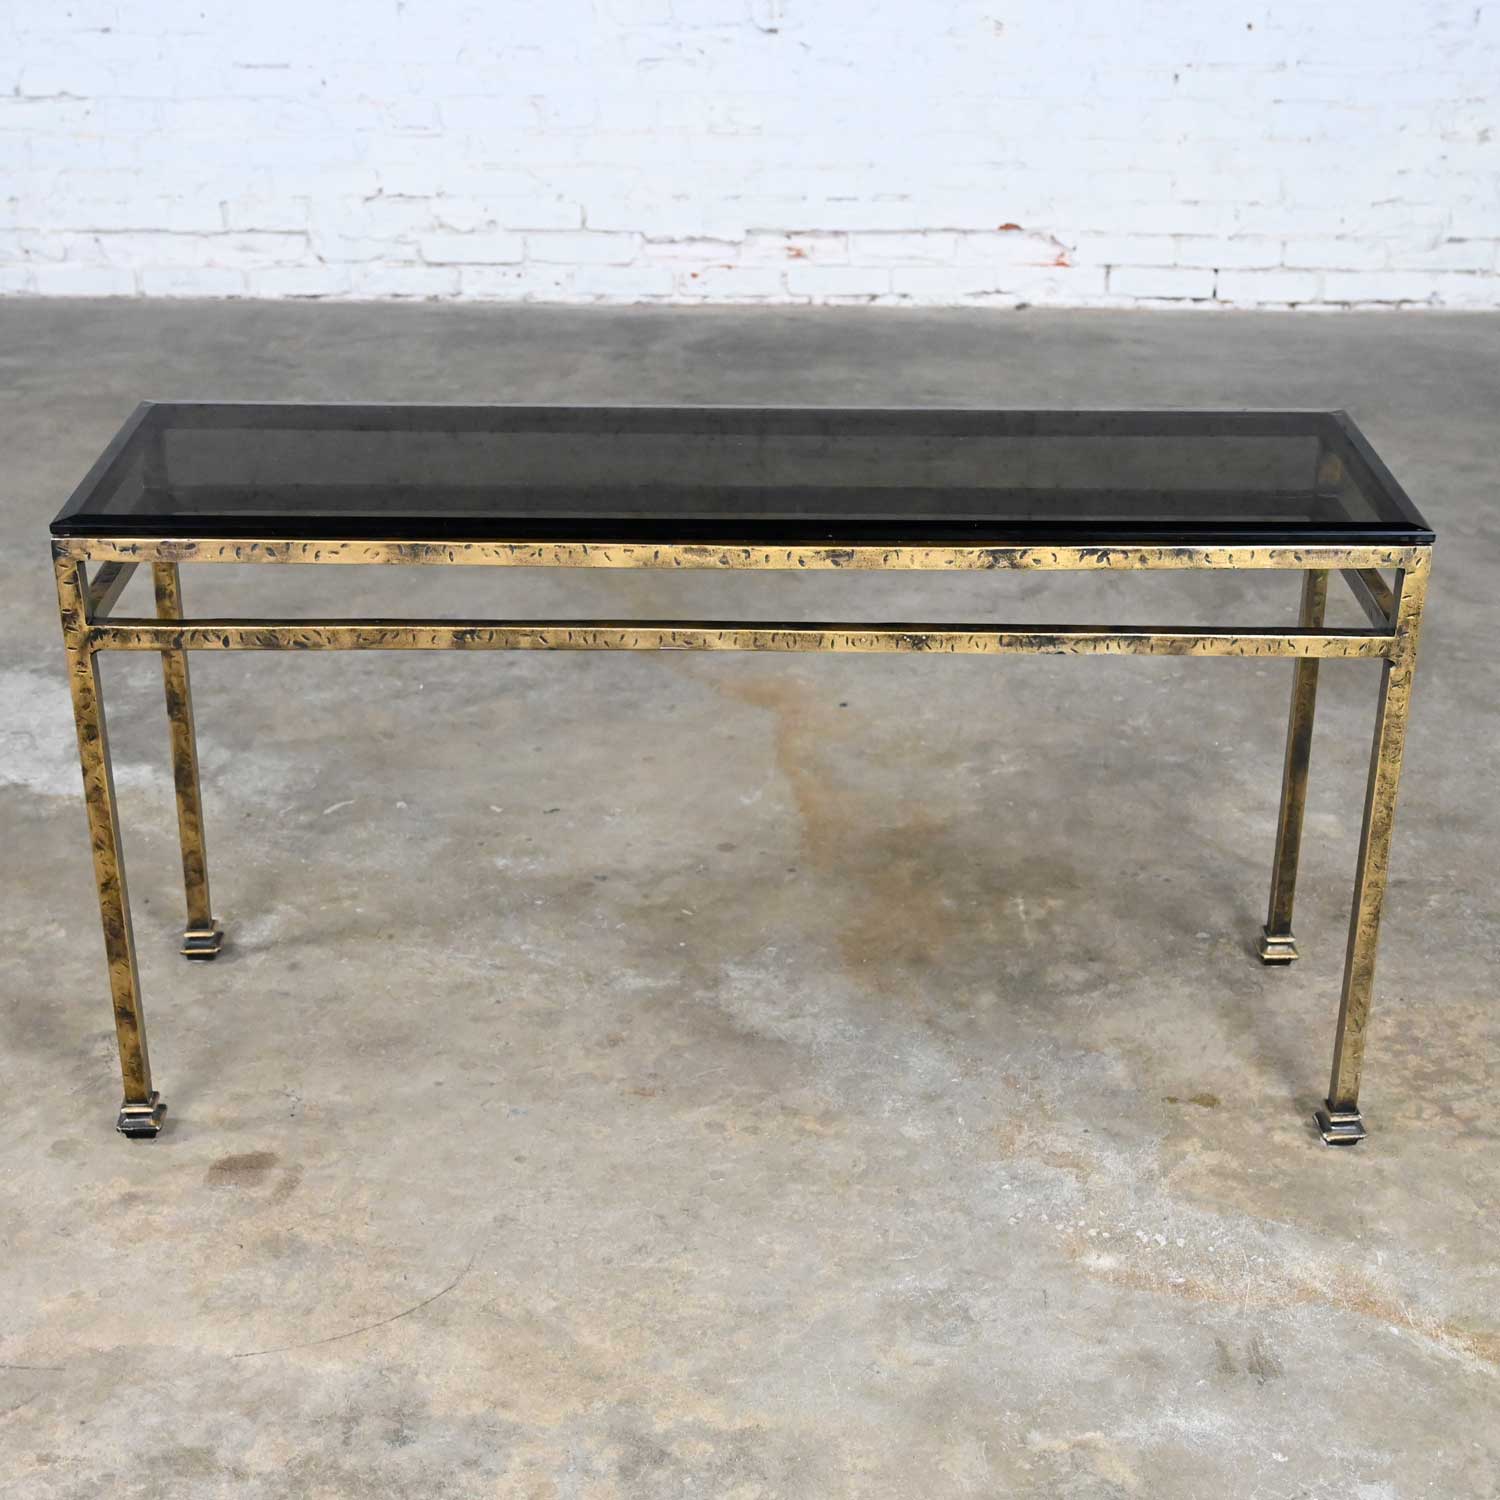 Modern Iron Console Sofa Table with Gold Hammered Look & Smoked & Beveled Glass Top